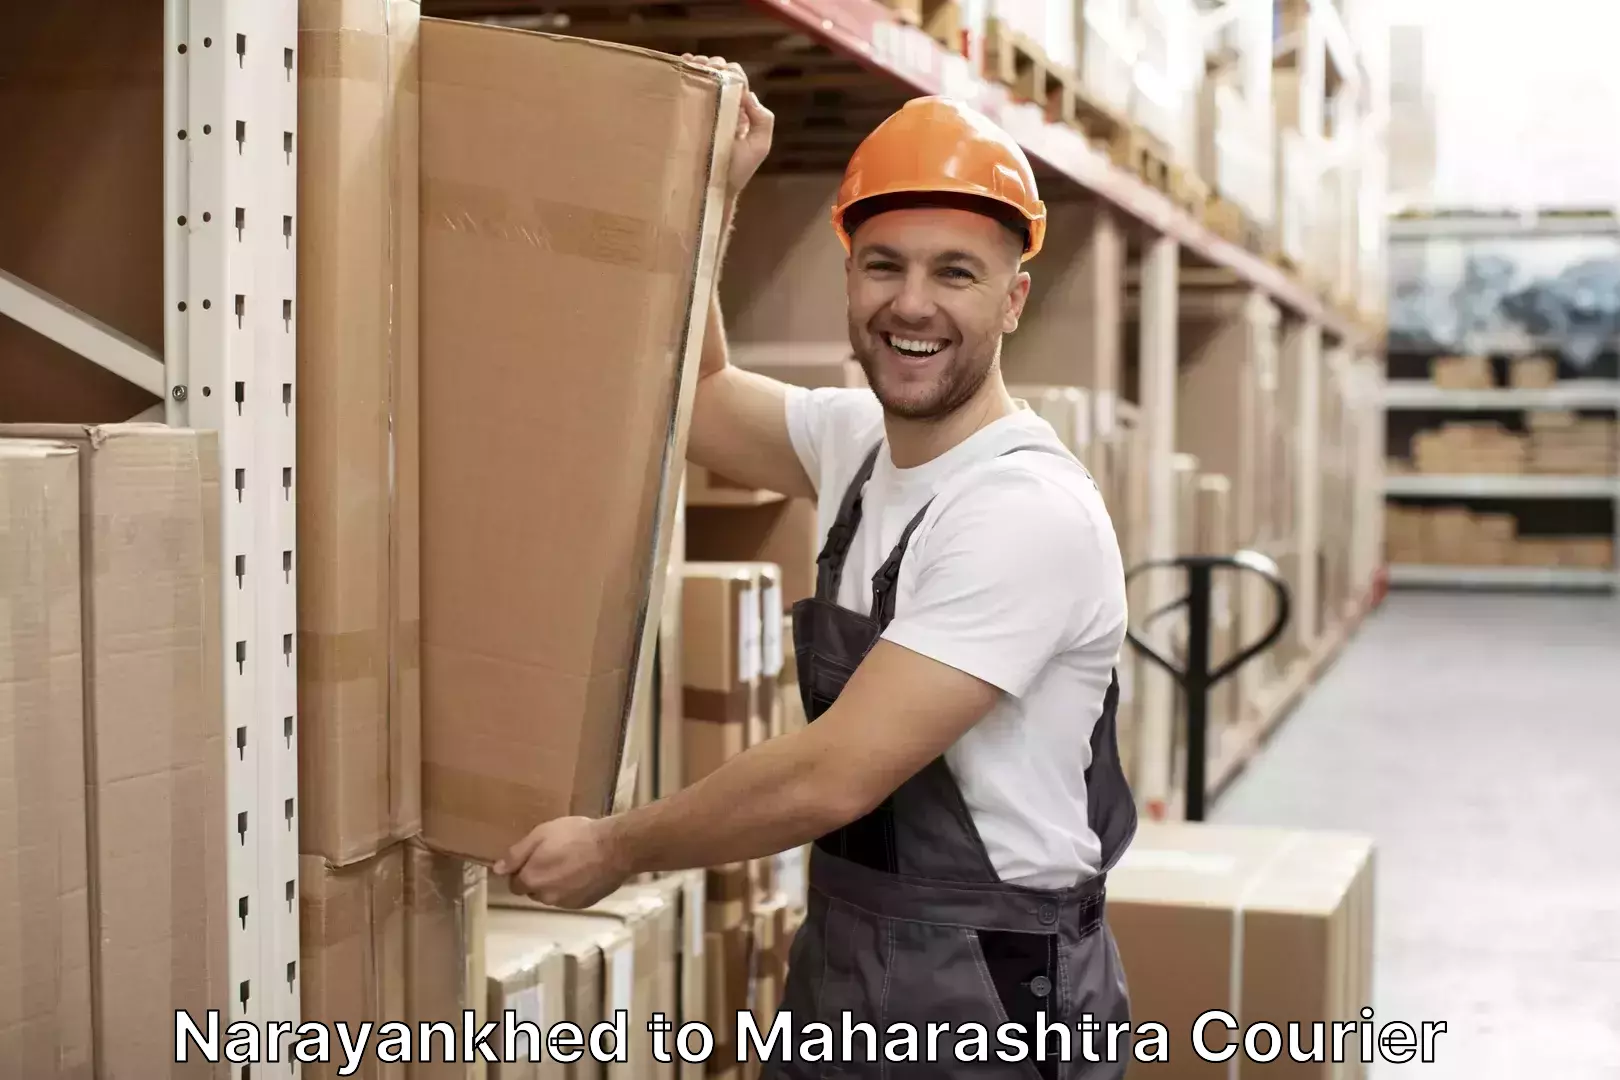 Luggage shipping specialists Narayankhed to Pune